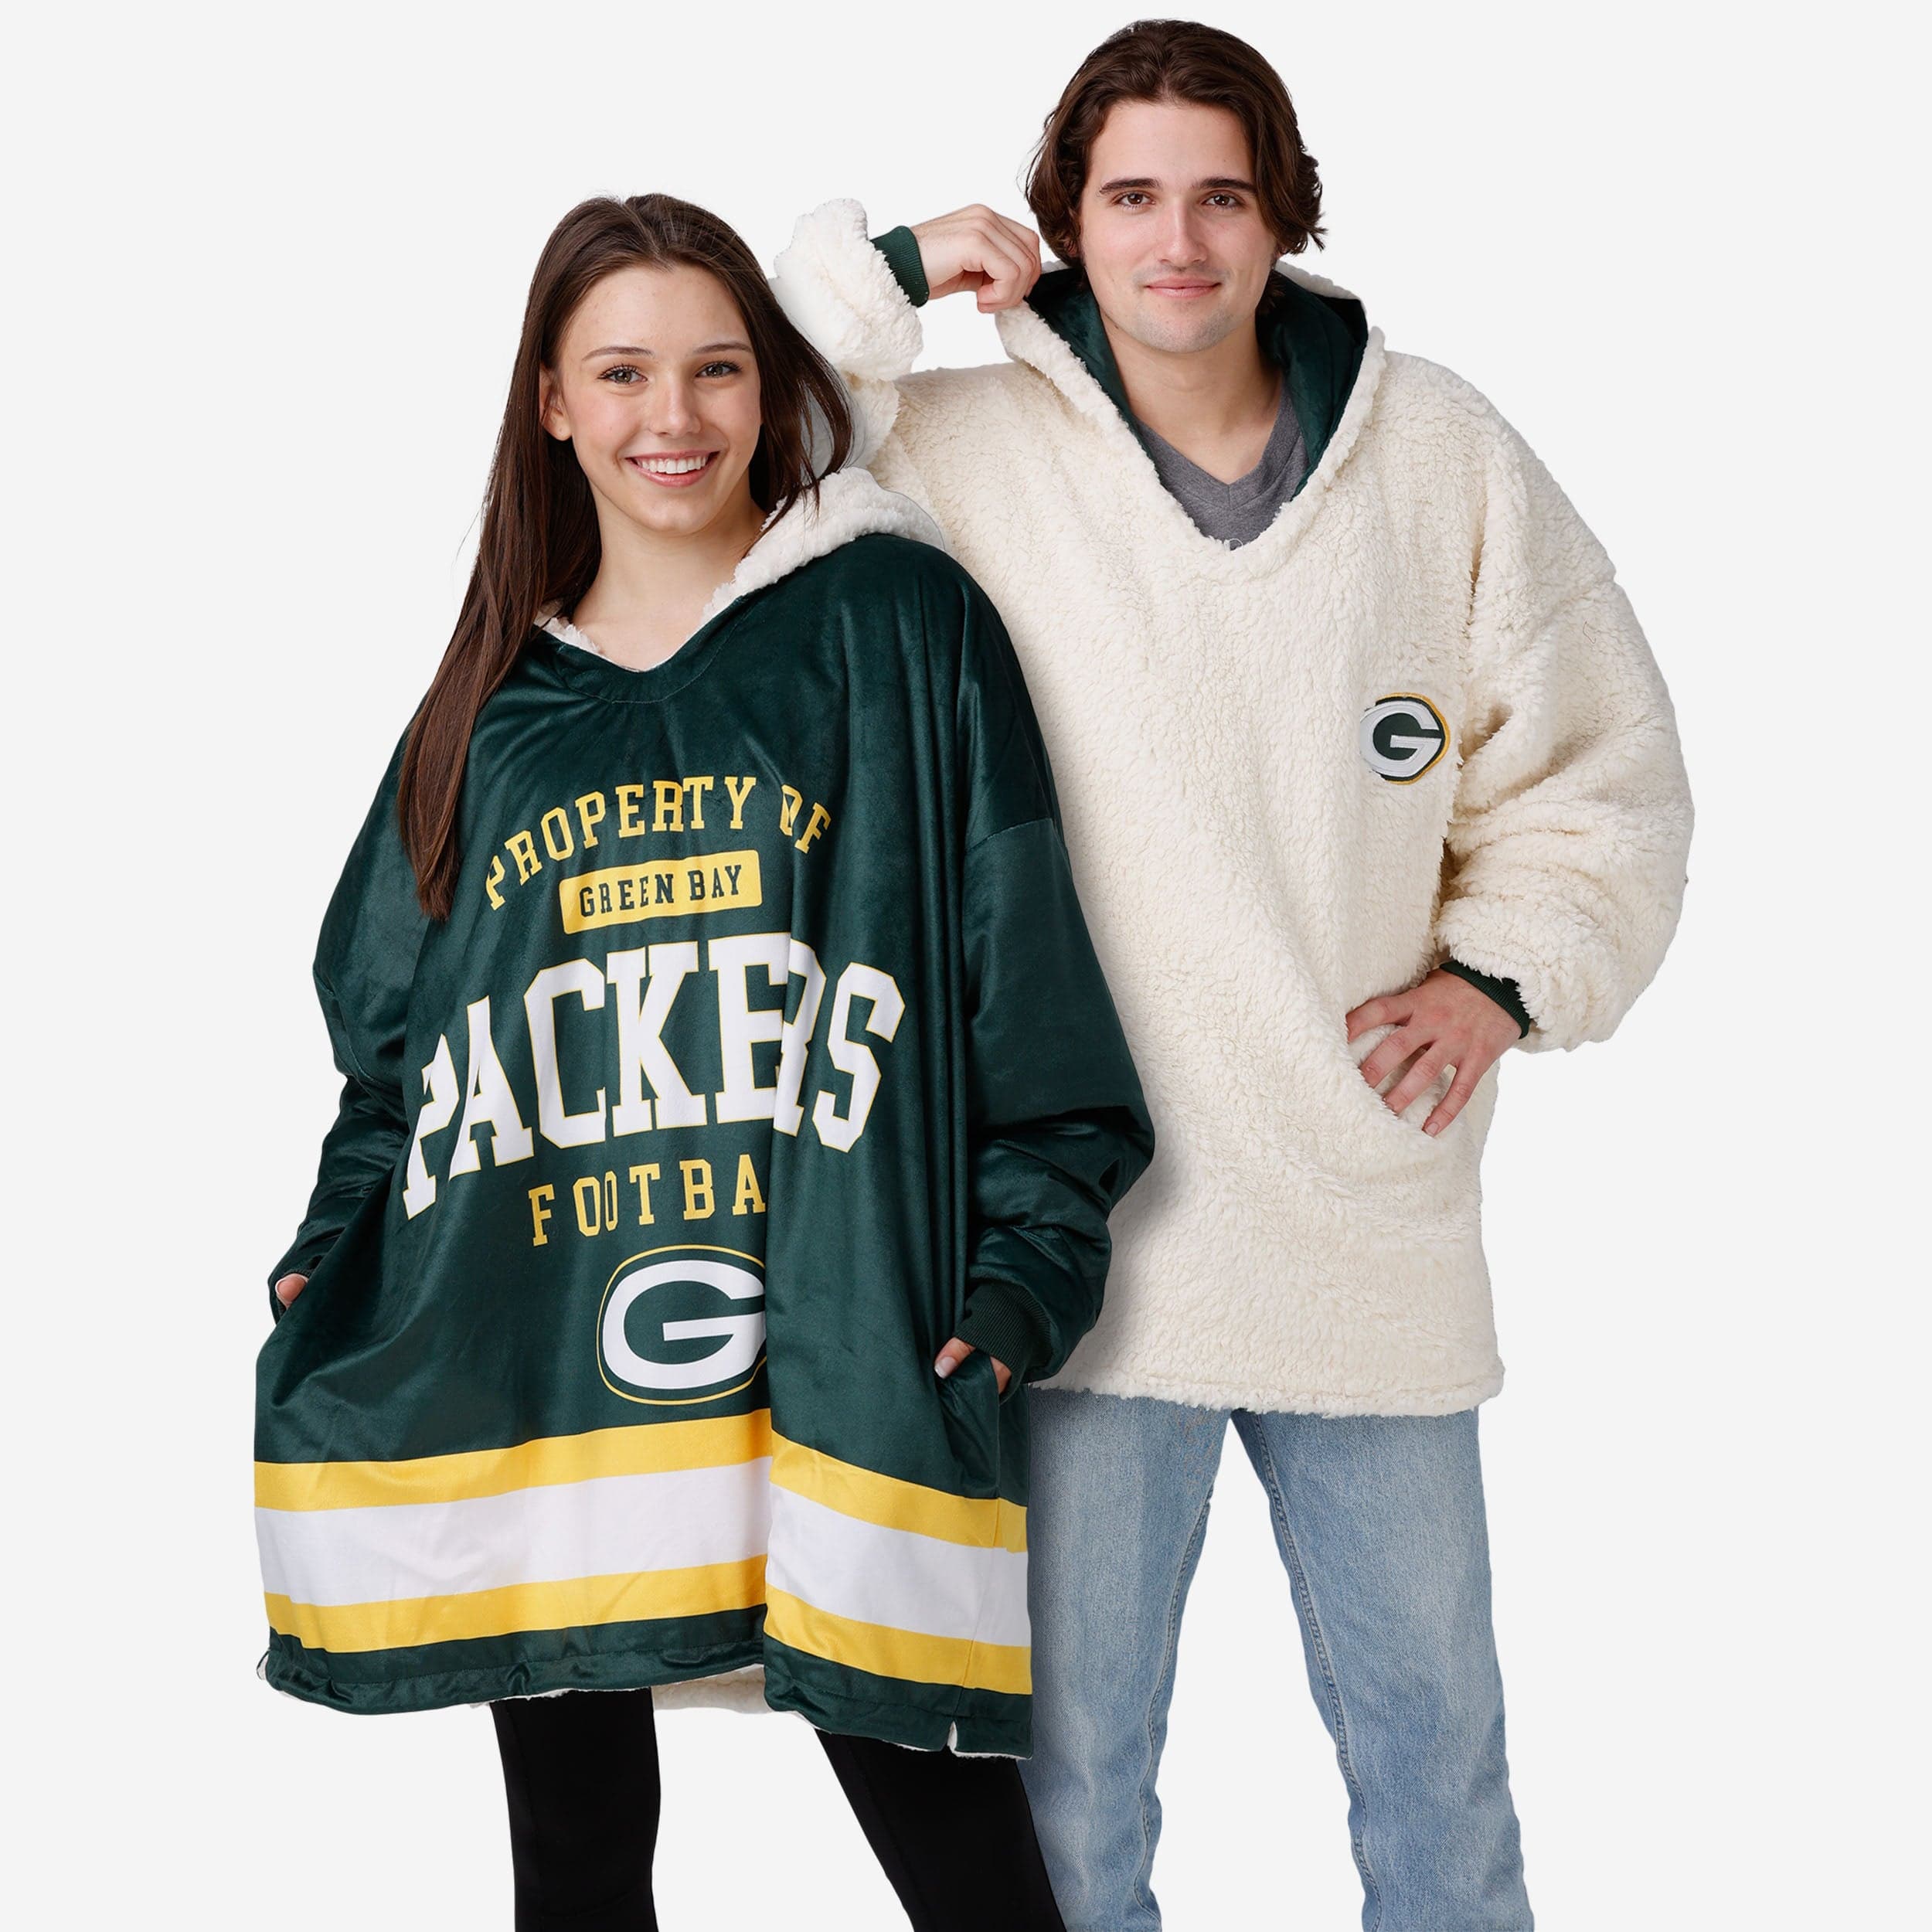 NFL Shop selling 'inverted' Green Bay Packers jersey